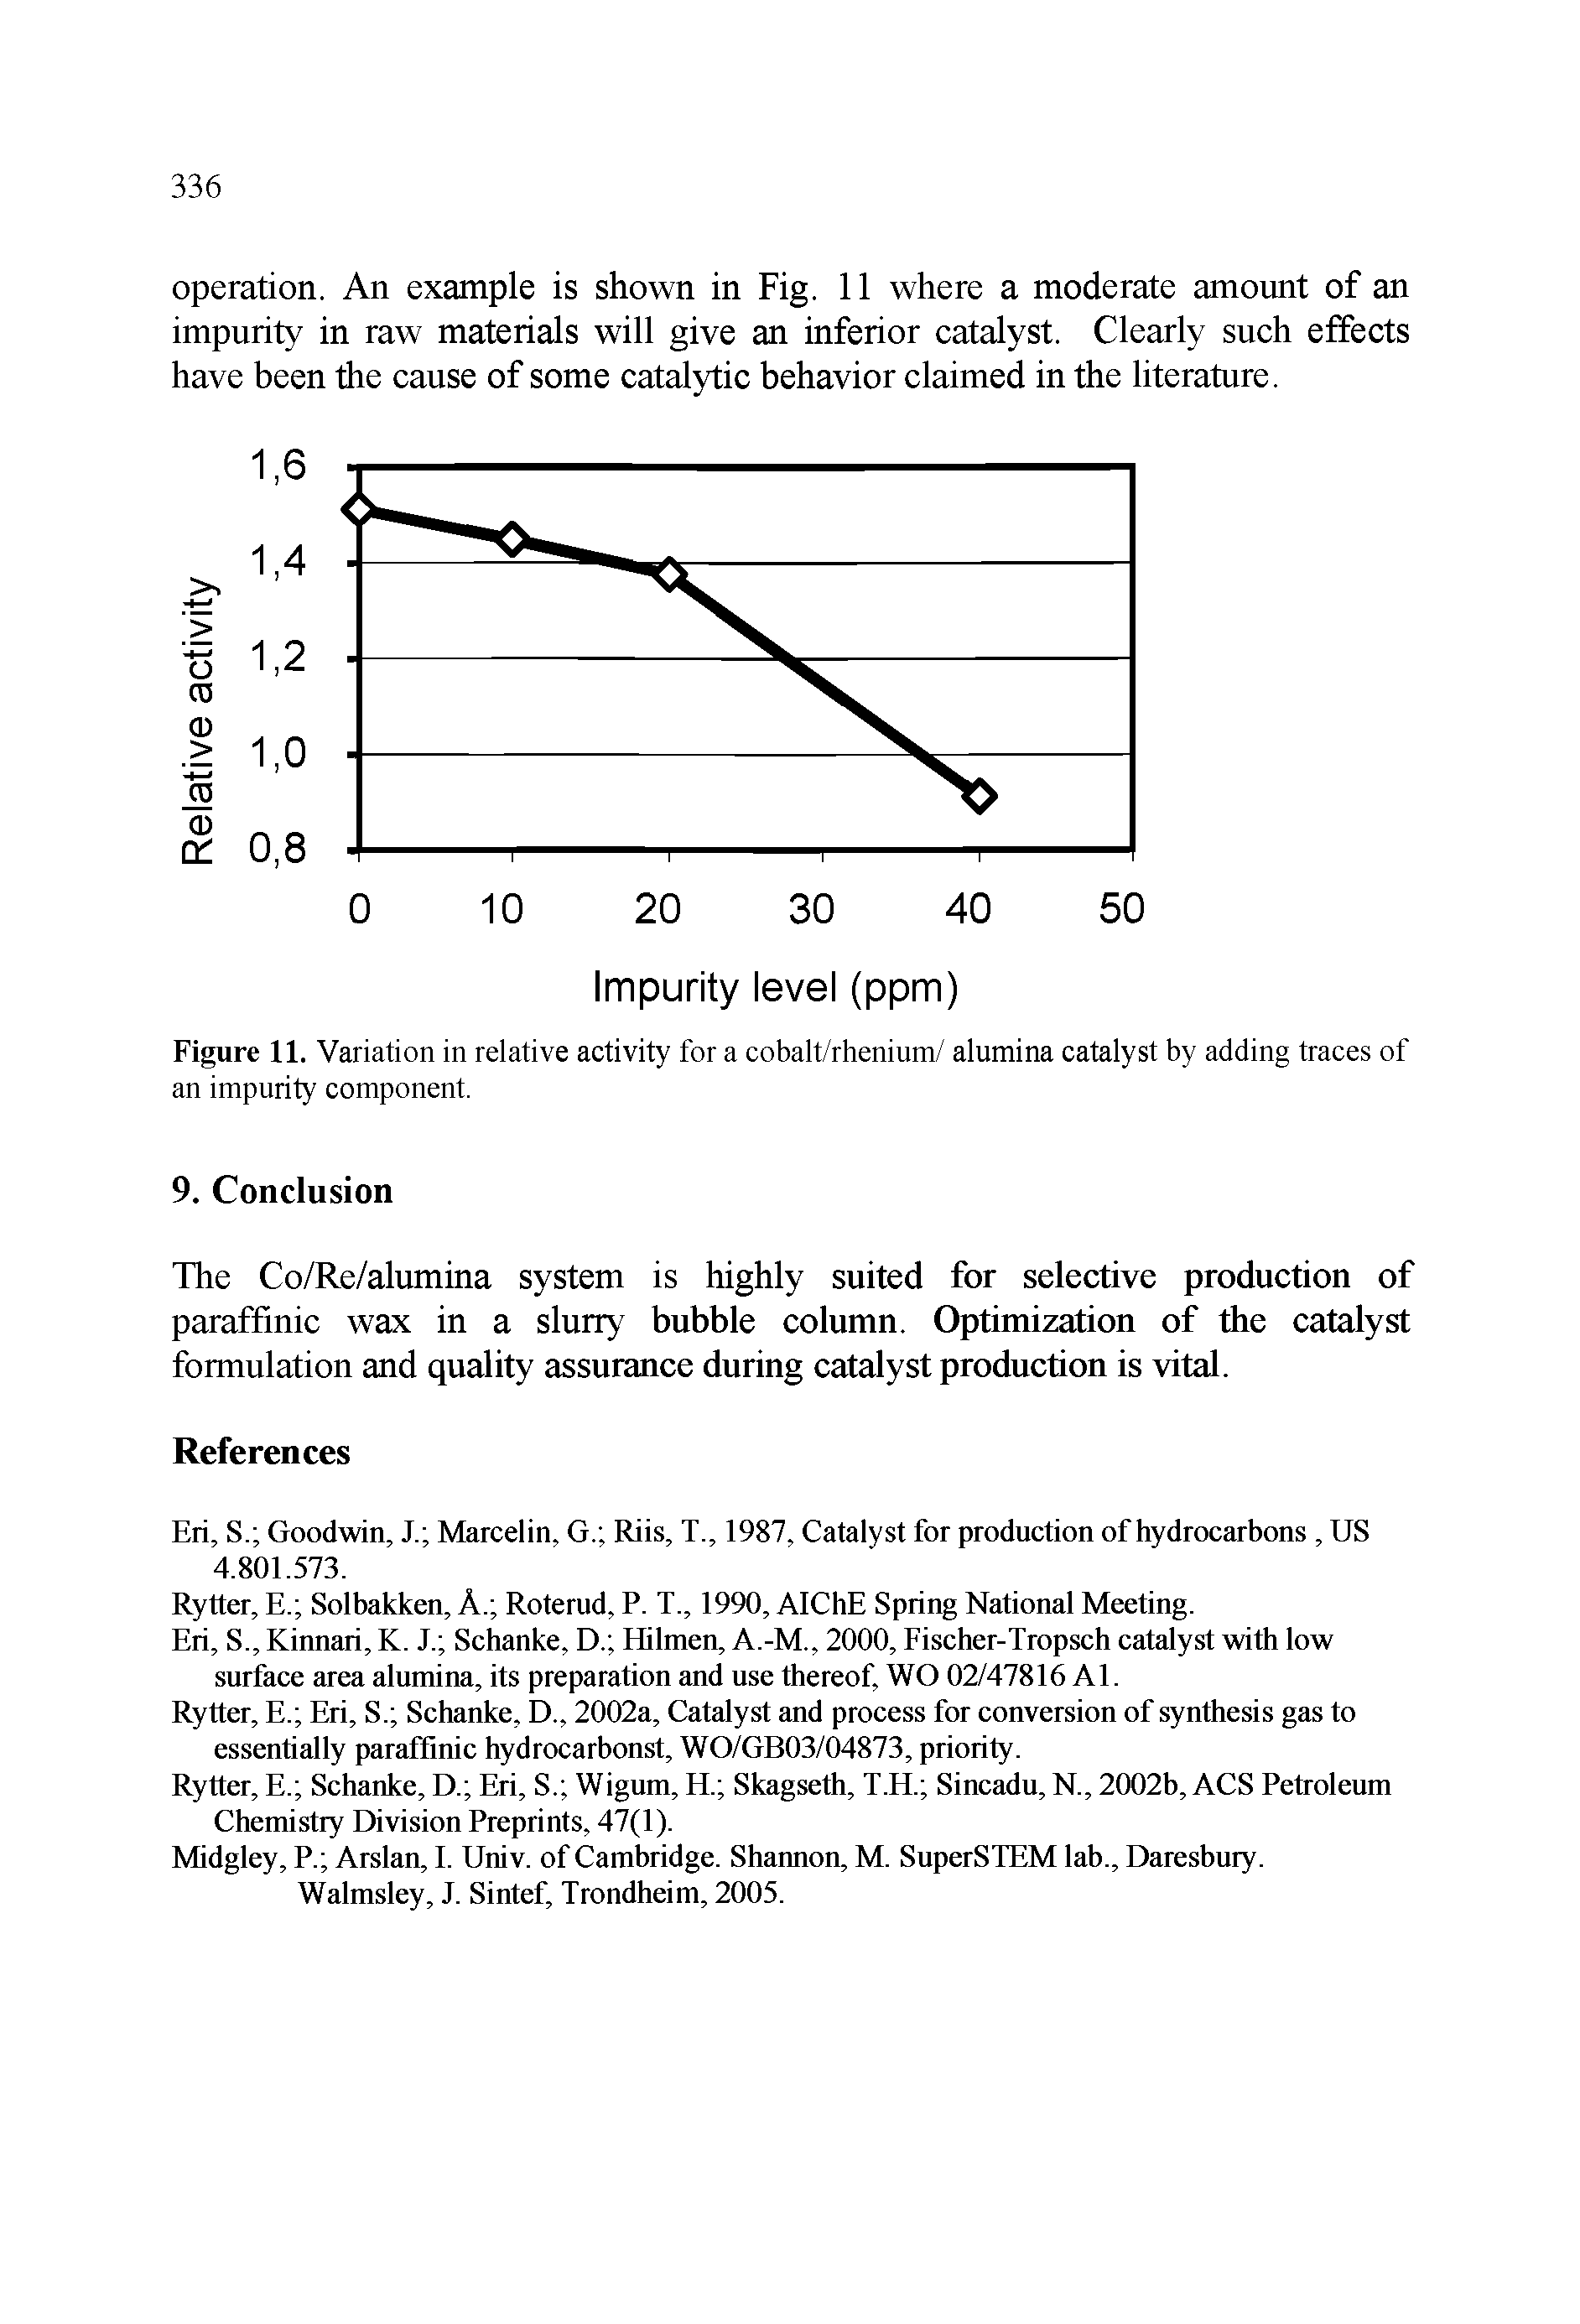 Figure 11. Variation in relative activity for a cobalt/rhenium/ alumina catalyst by adding traces of an impurity component.